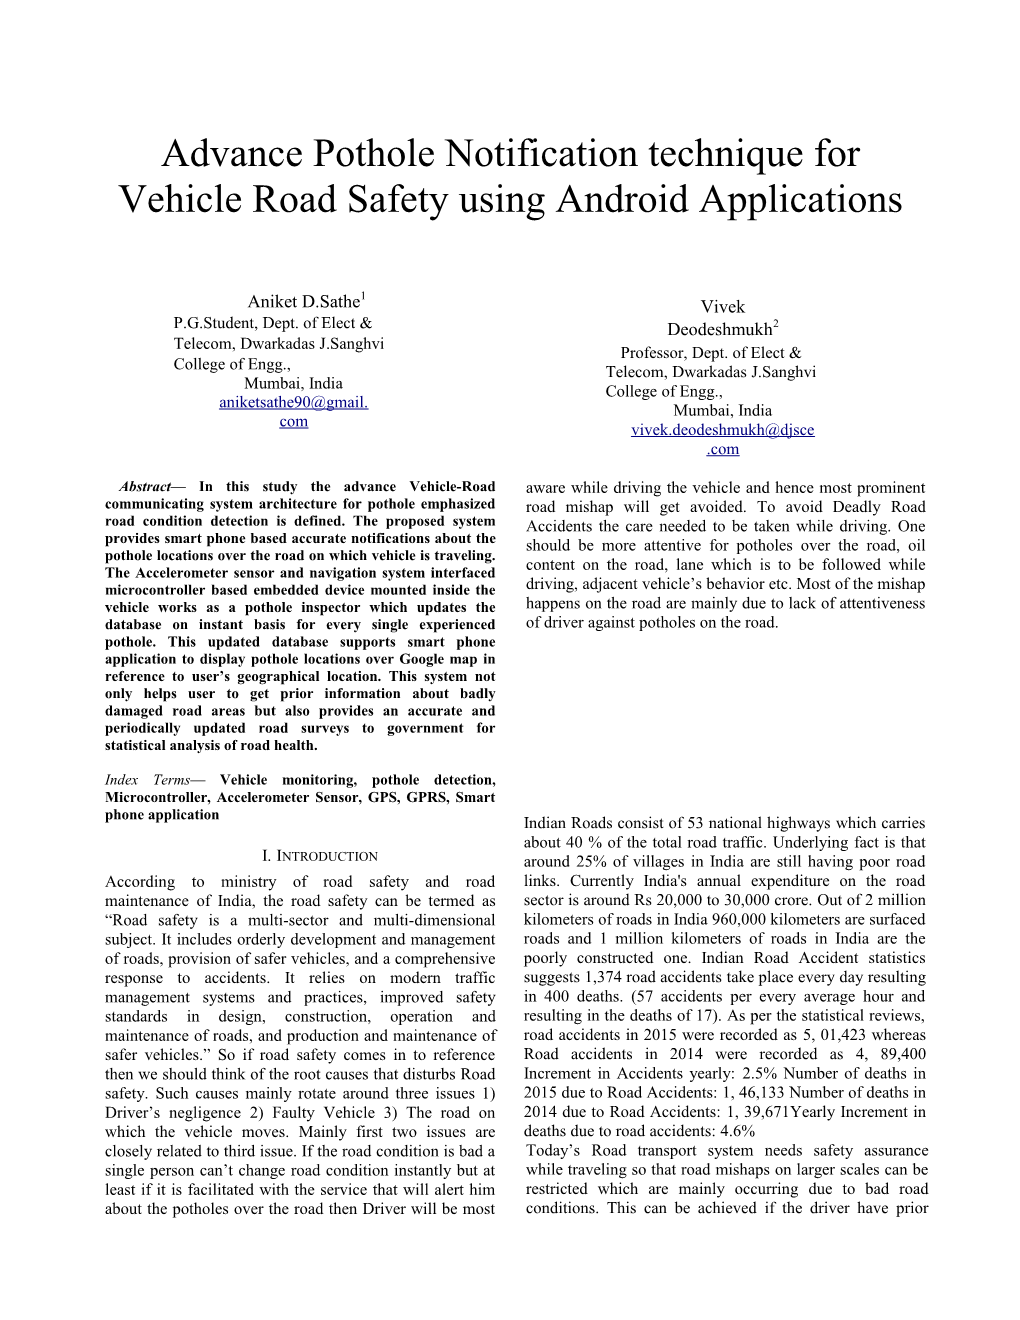 Advance Pothole Notification Technique for Vehicle Road Safety Using Android Applications